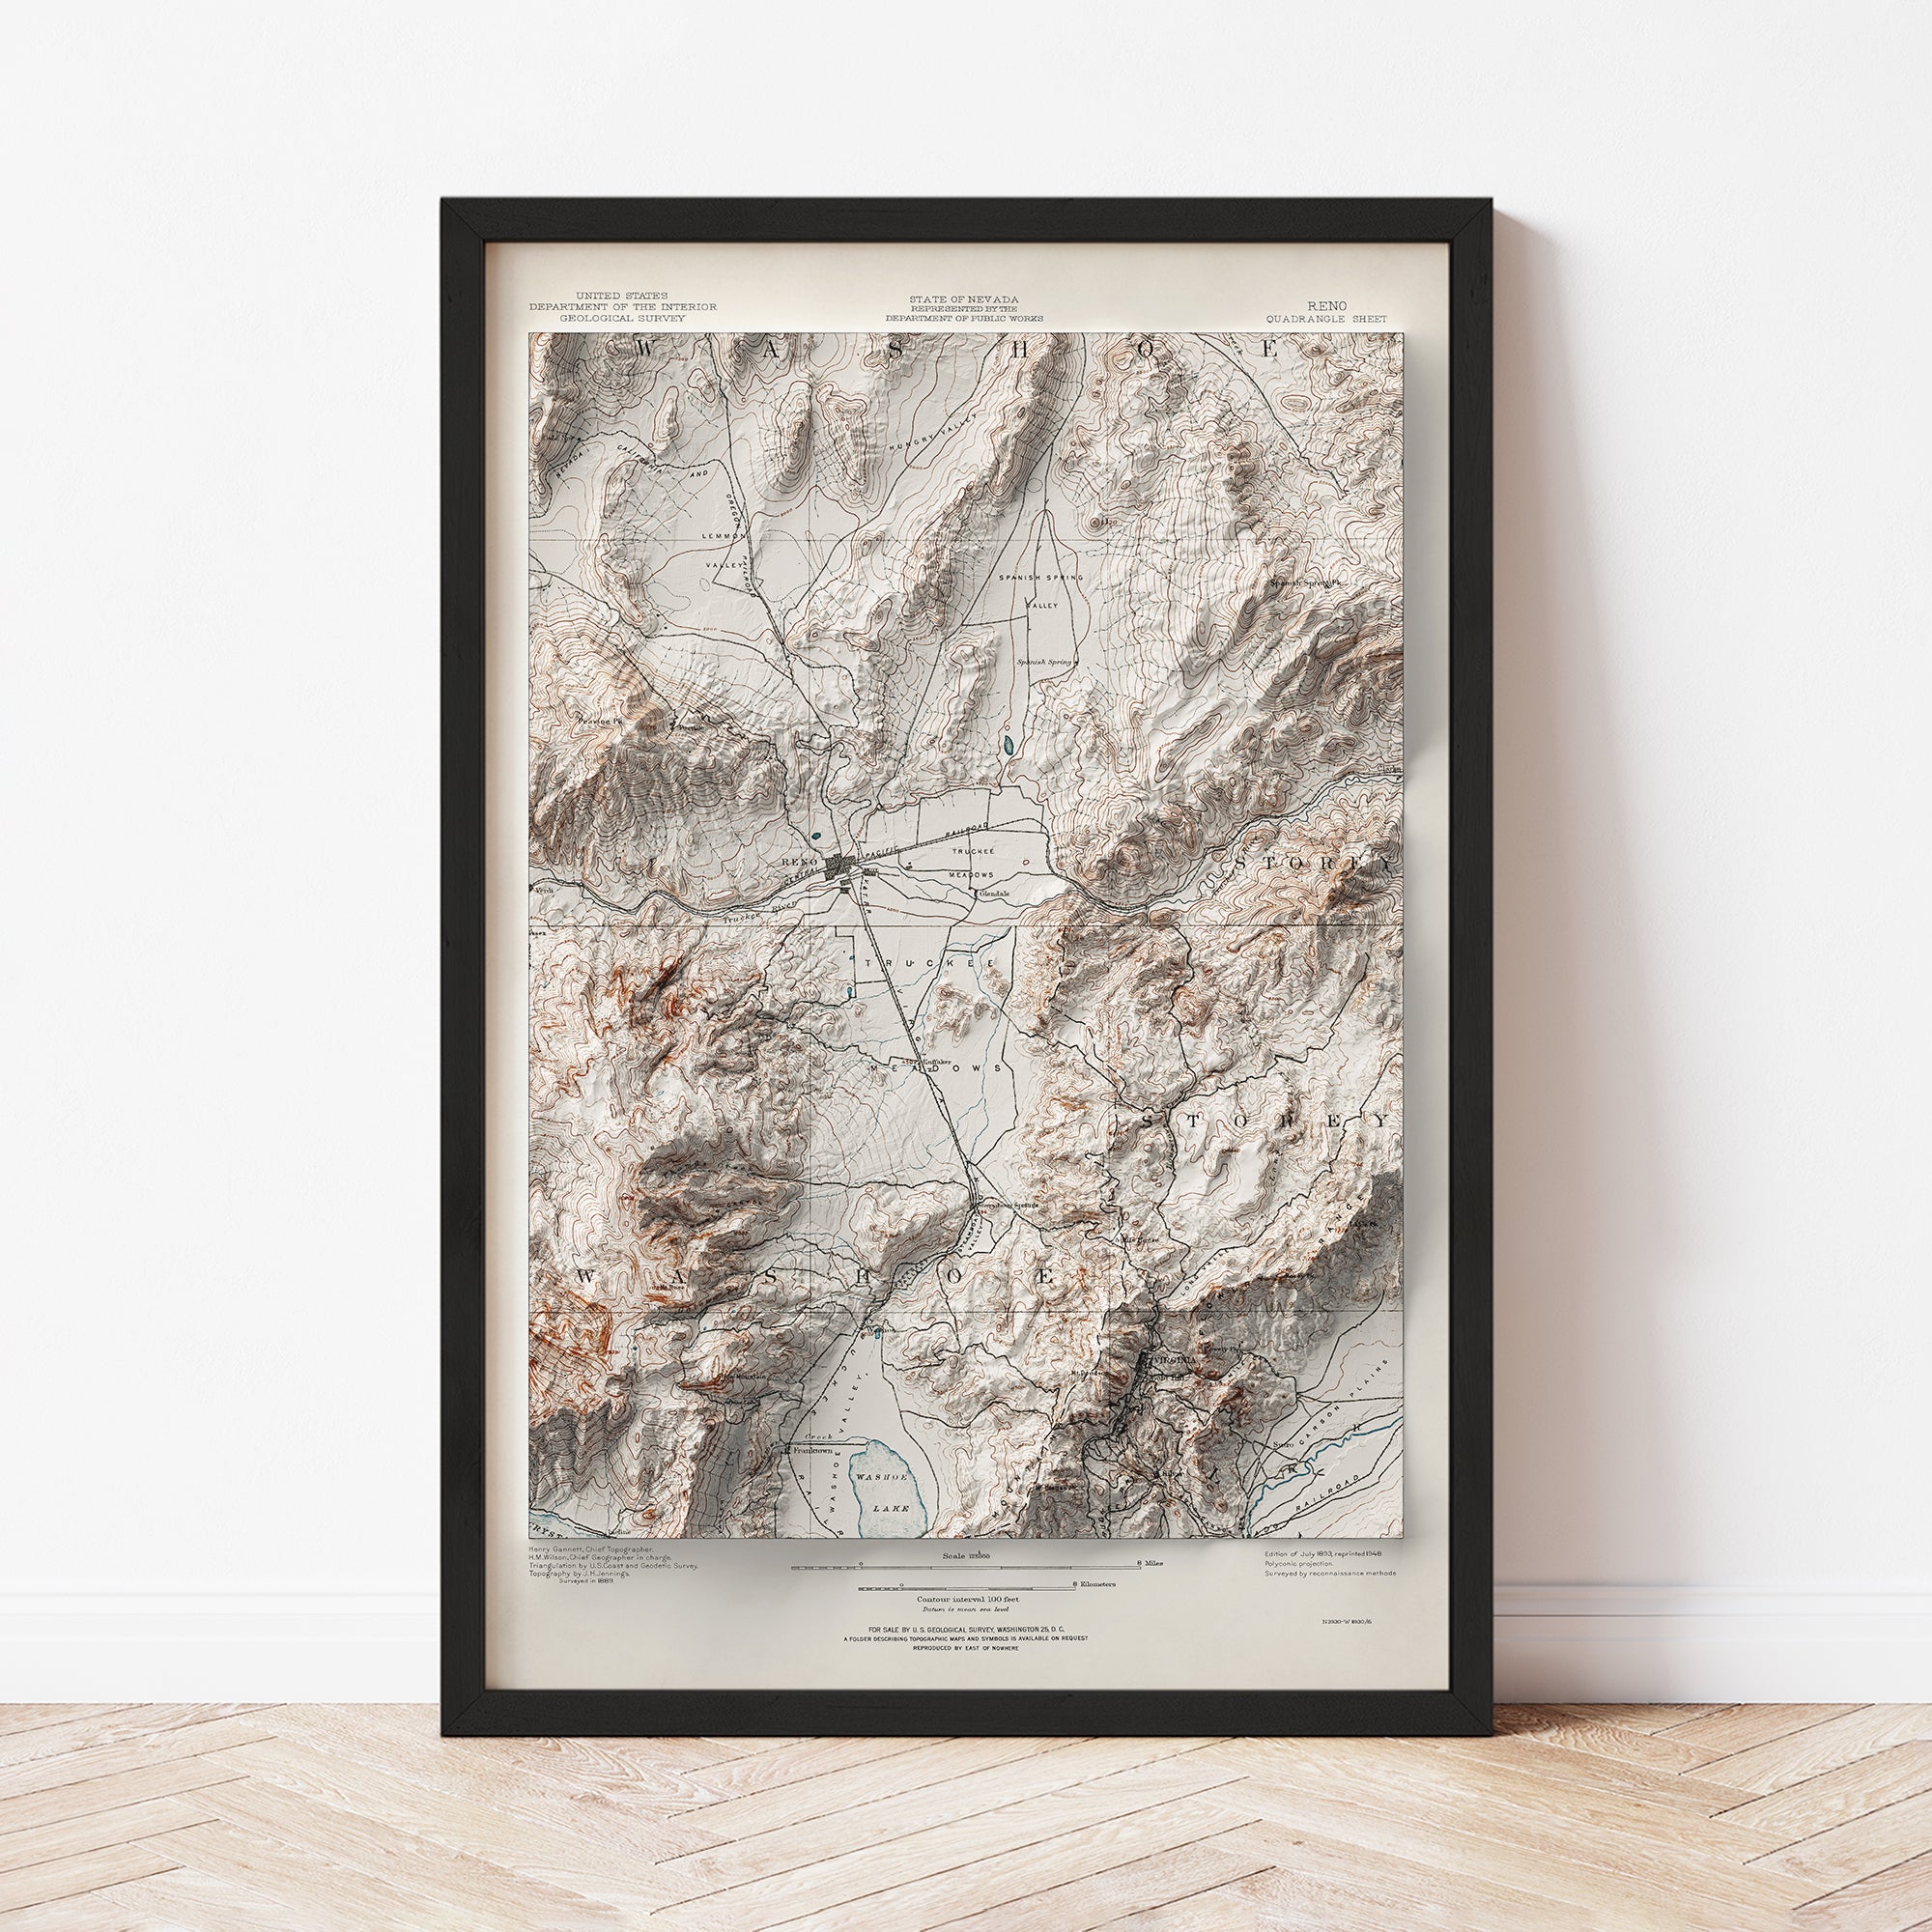 Reno, NV - Vintage Shaded Relief Map (1893)